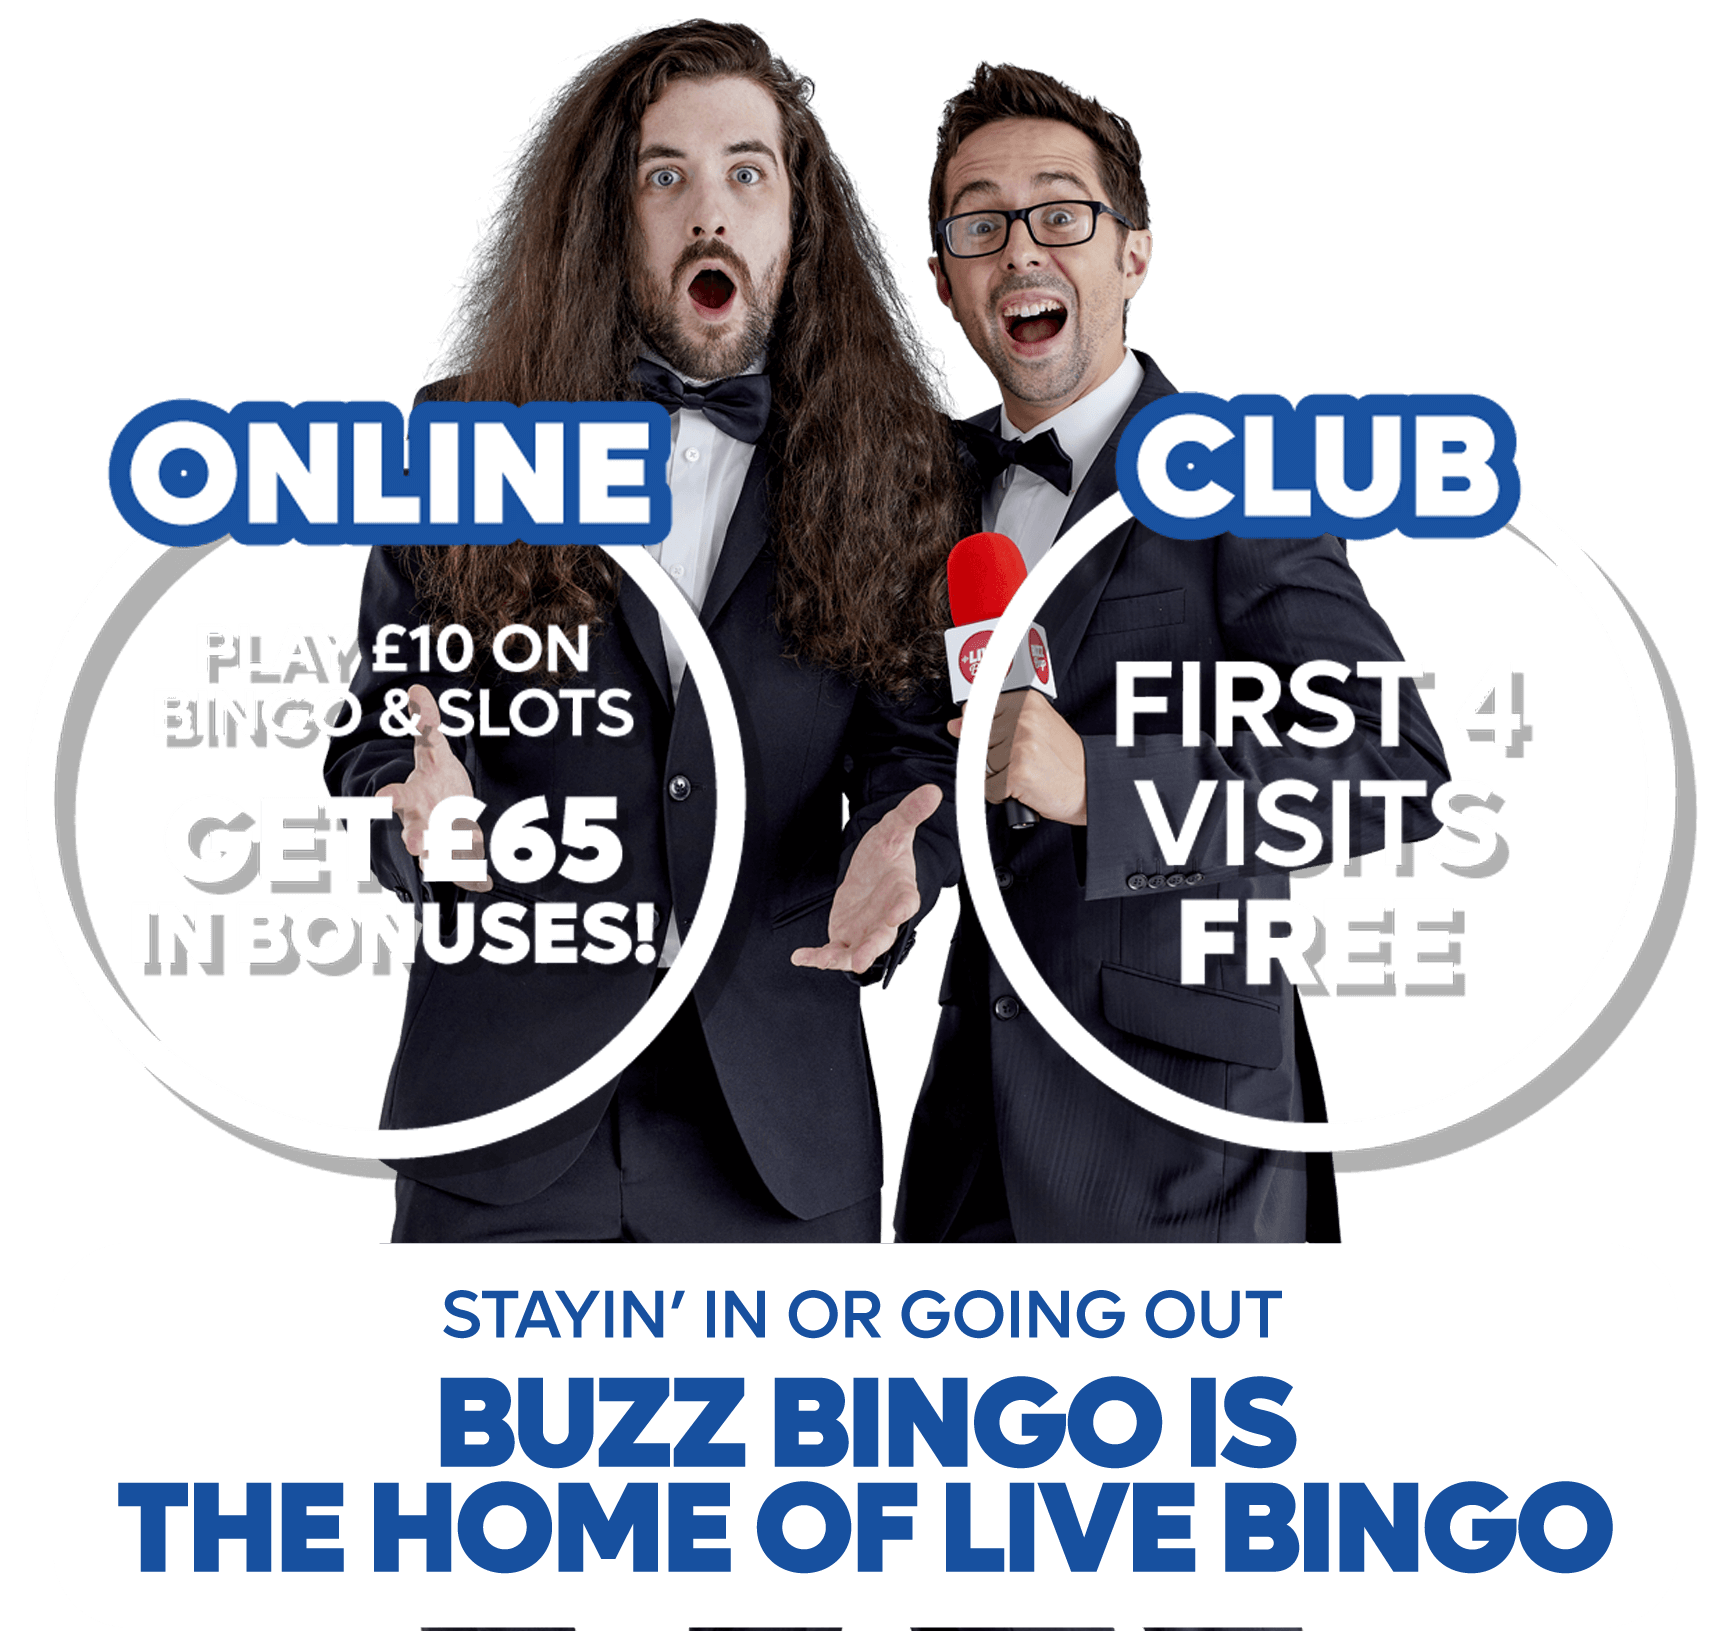 Stayin in or going out, Buzz Bingo is THE HOME OF LIVE BINGO • retail: first 4 visits free • online - PLAY £10 ON BINGO & SLOTS, GET £65 IN BONUSES!